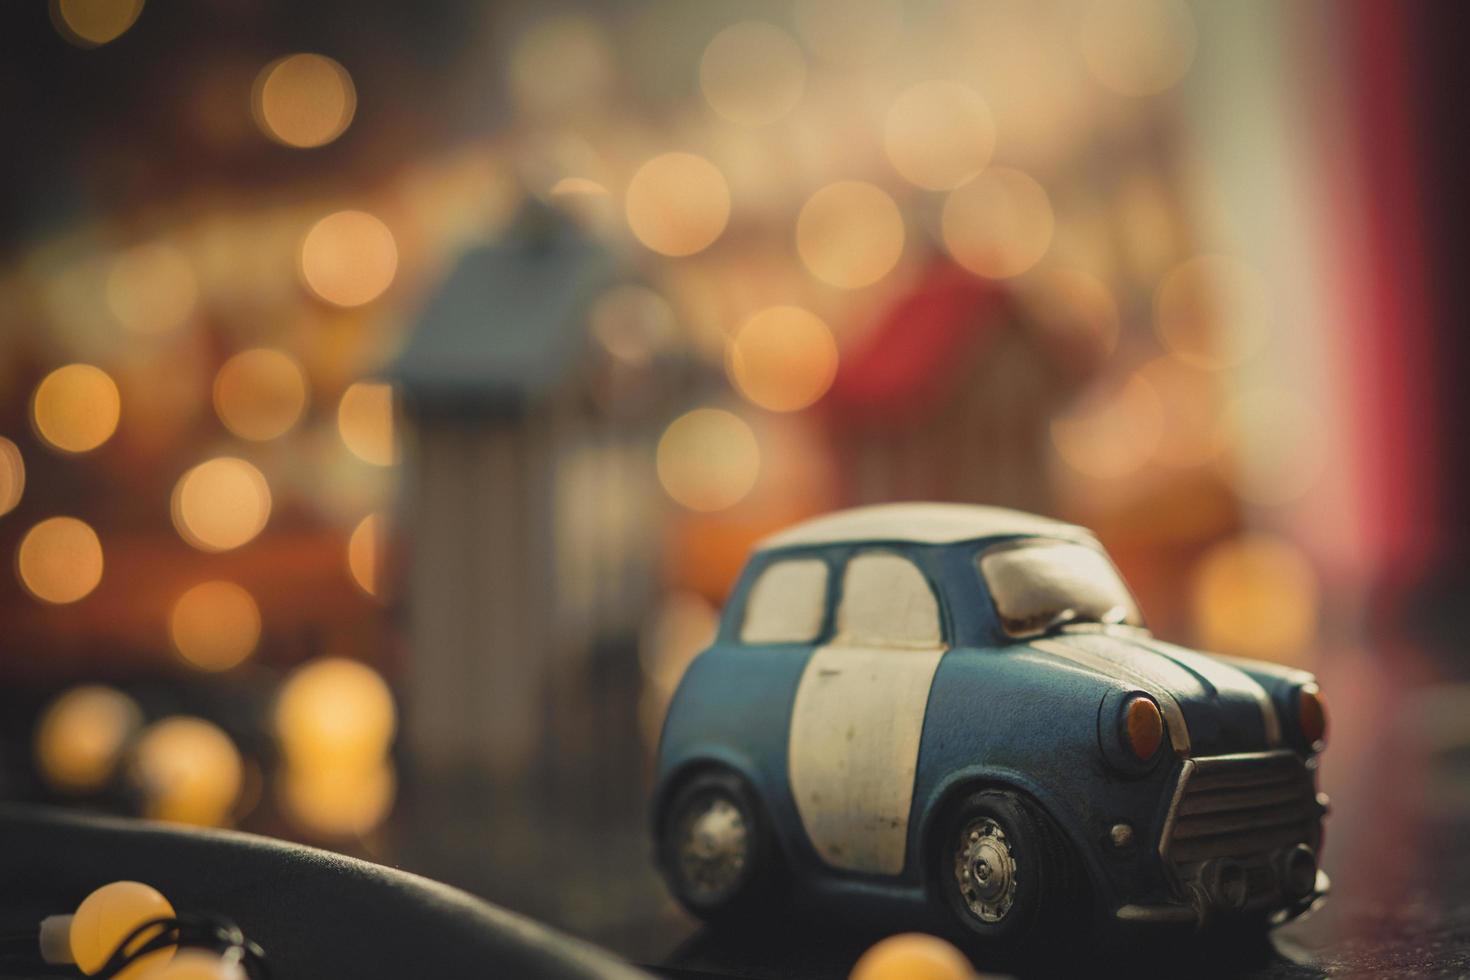 Blue and white cute cartoon car on orange bokeh background. Used car concept. Toy car model. Car toy model parked in town at night decoration with bokeh light. Night life journey. Road trip concept. photo